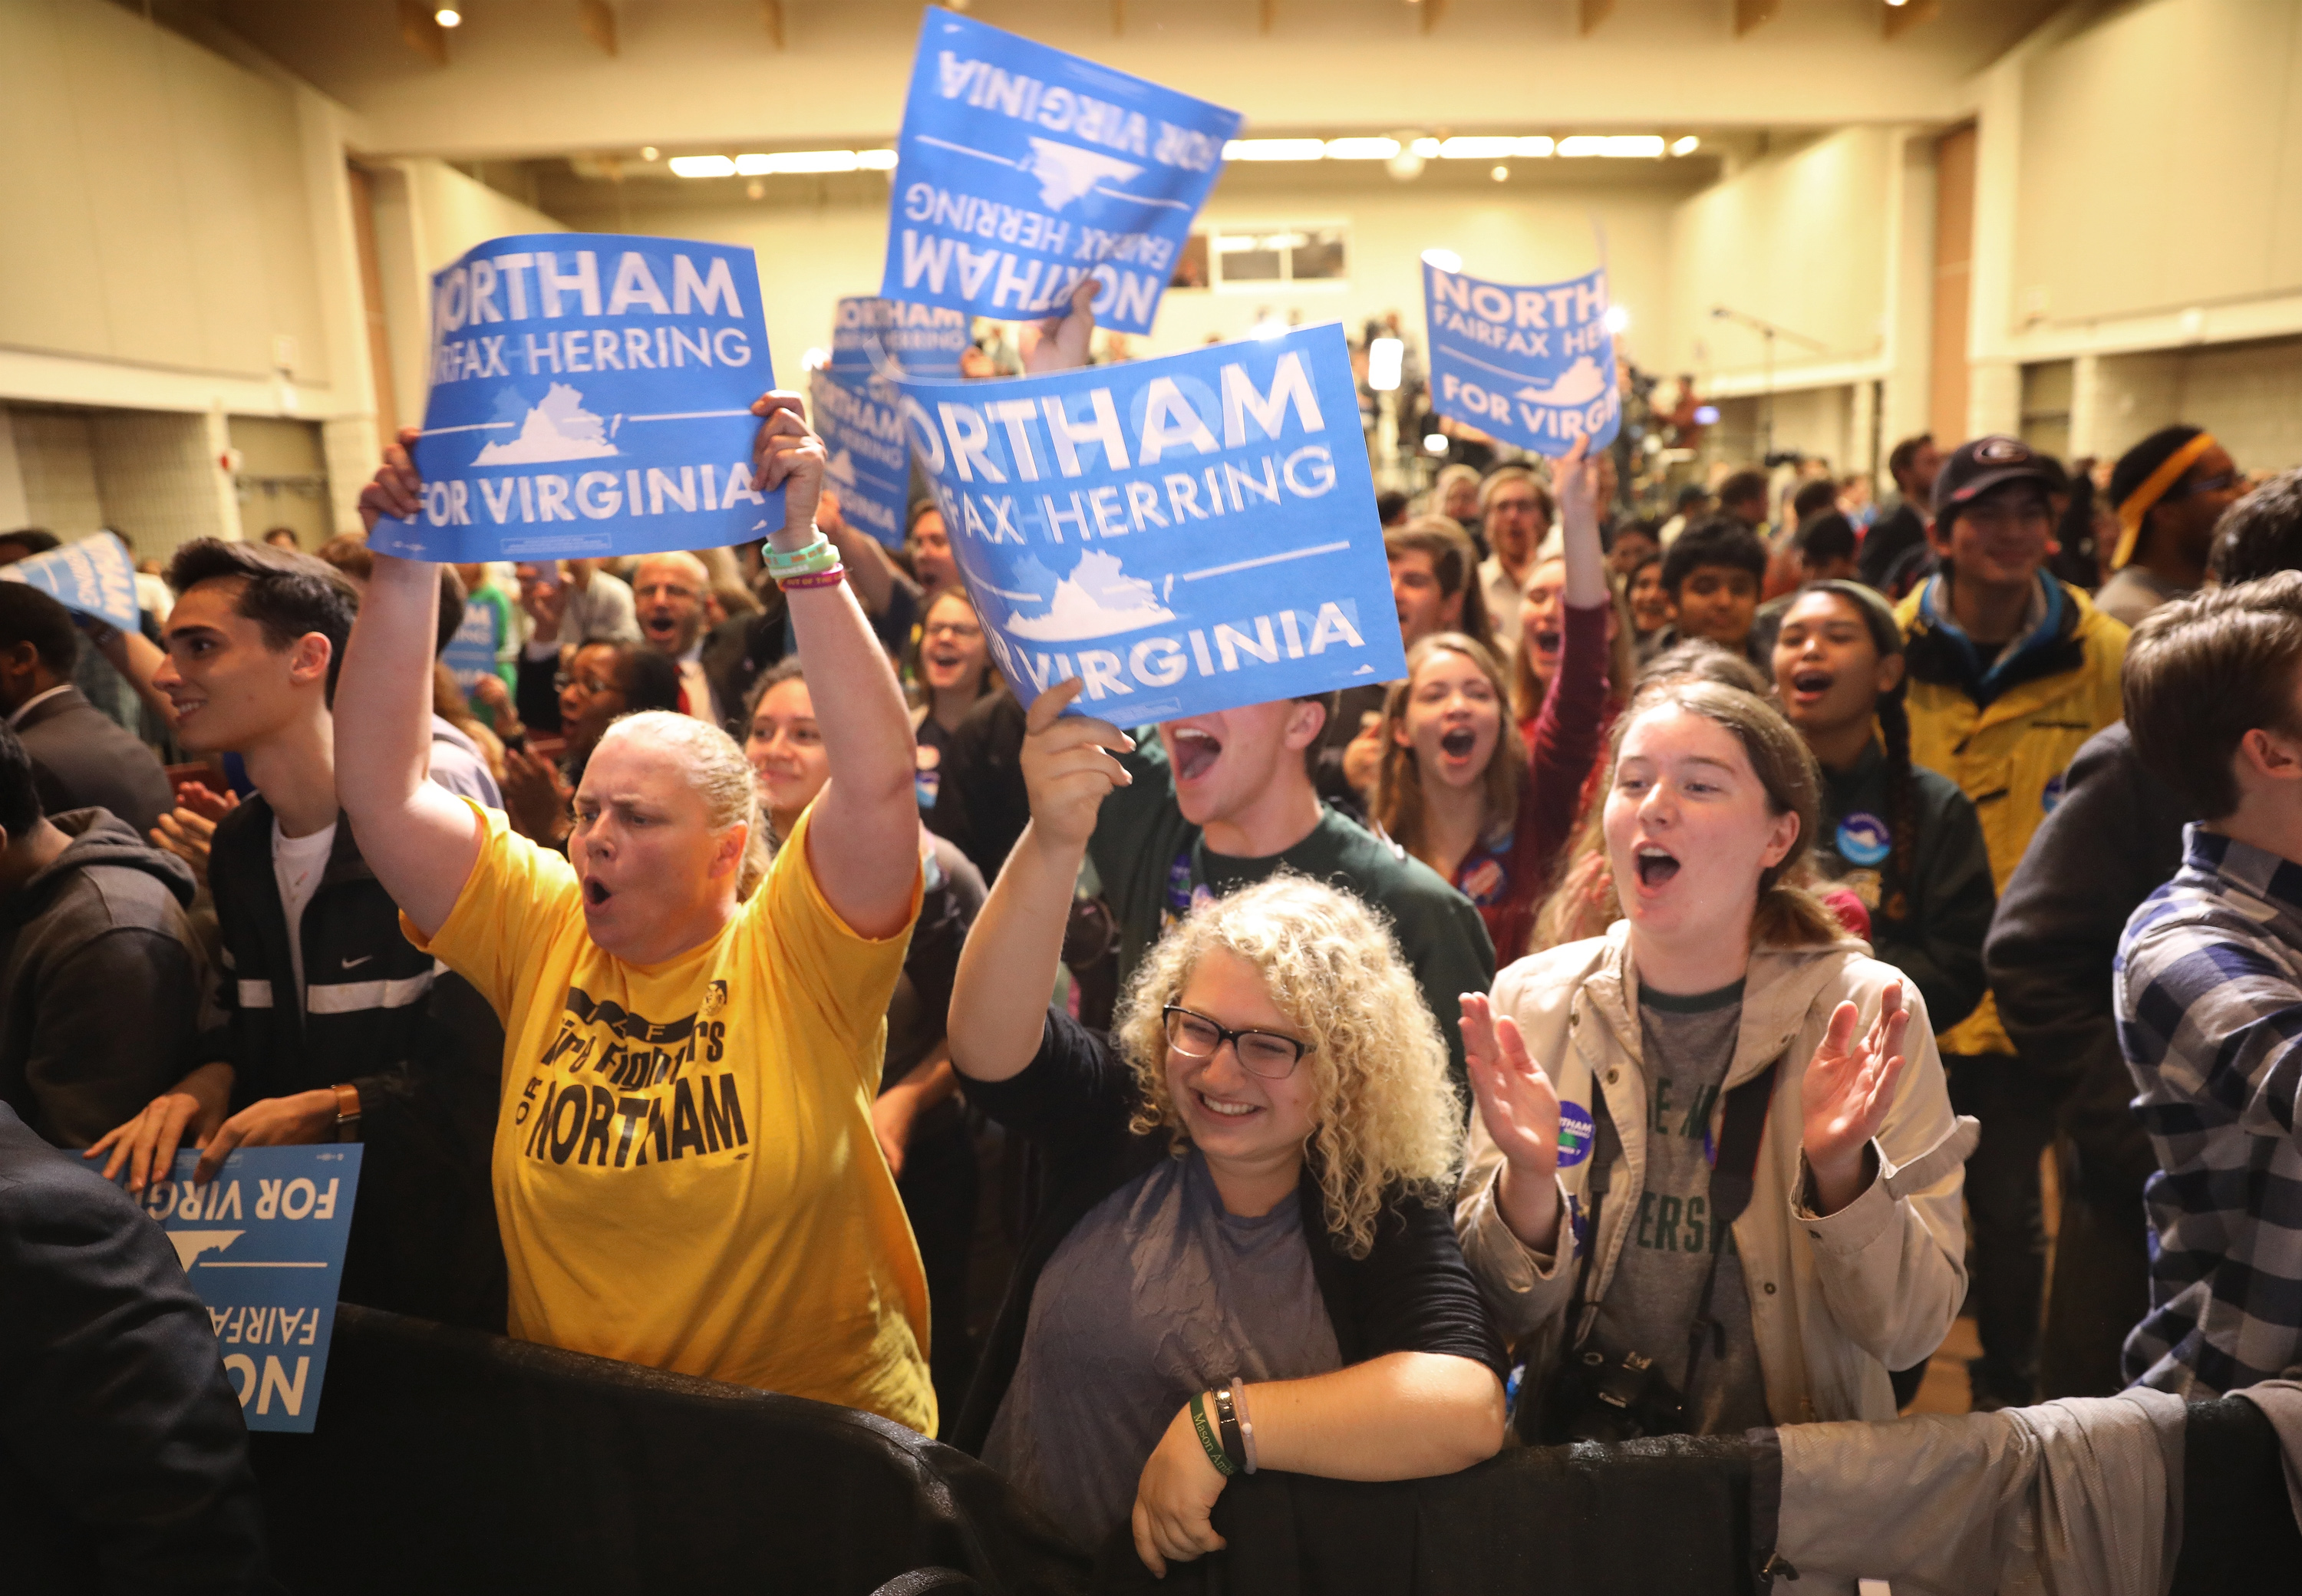 FAIRFAX, VA - NOVEMBER 07:  Supporters of Ralph Northam, the Democratic candidate for governor of Virginia, celebrate as early projections indicated a Northam victory at an election night rally November 7, 2017 in Fairfax, Virginia. Northam has fought a close race with Republican candidate Ed Gillespie.  (Photo by Win McNamee/Getty Images) (Win McNamee&mdash;Getty Images)